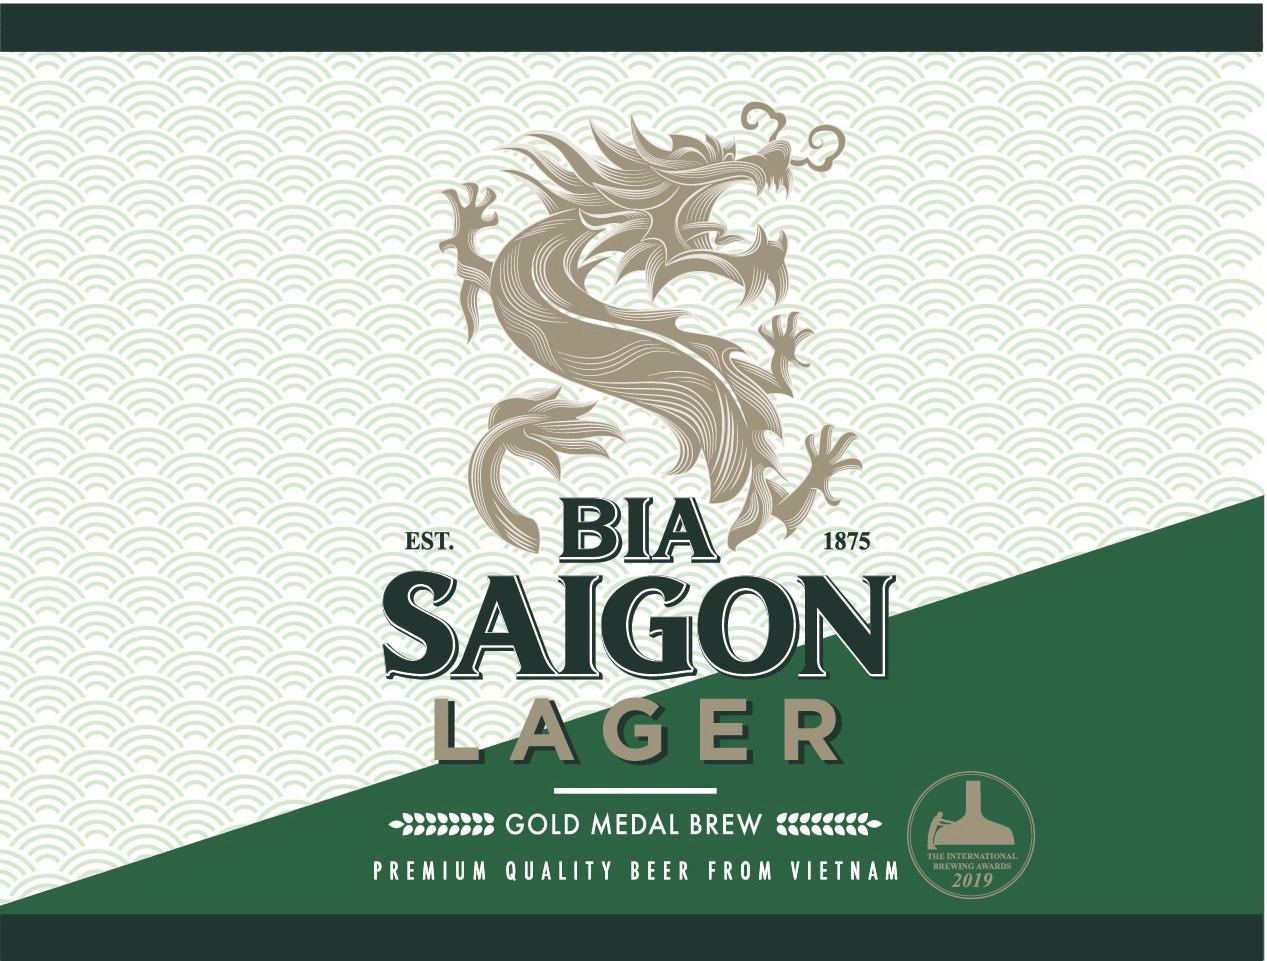  BIA SAIGON LAGER EST. 1875 GOLD MEDAL BREW PREMIUM QUALITY BEER FROM VIETNAM